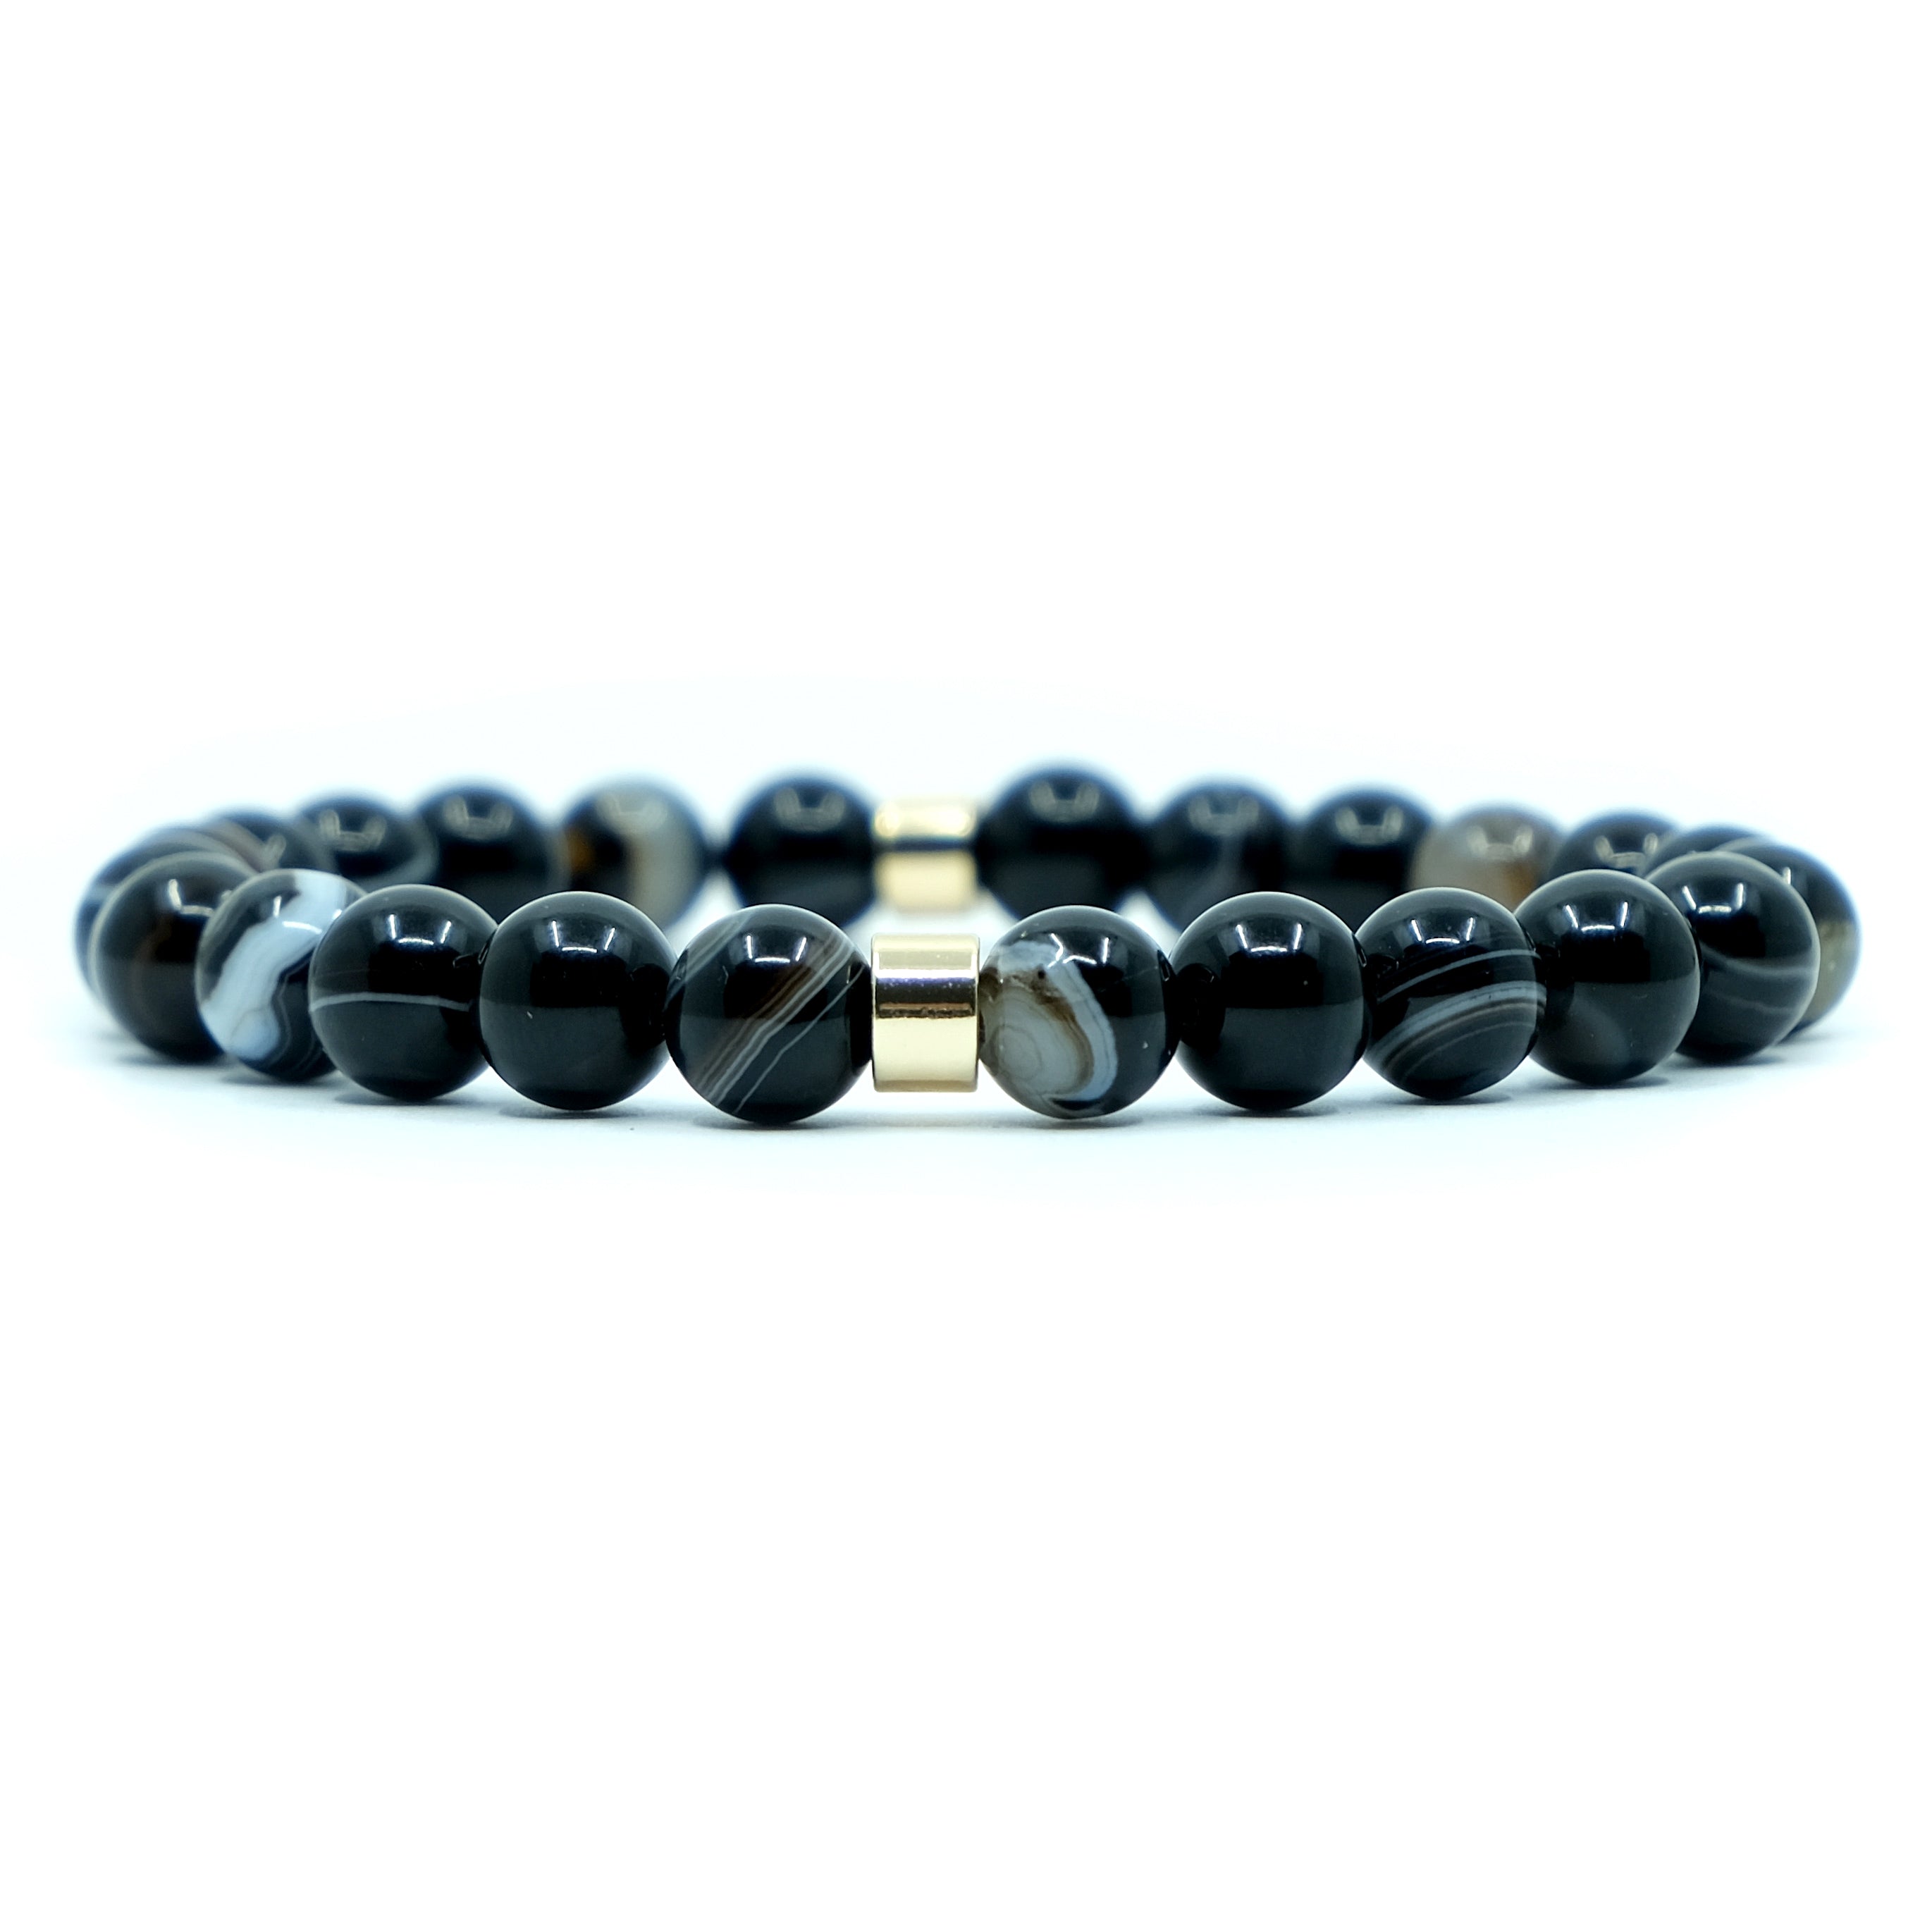 8mm black agate stretch bracelet with gold plated feature bead